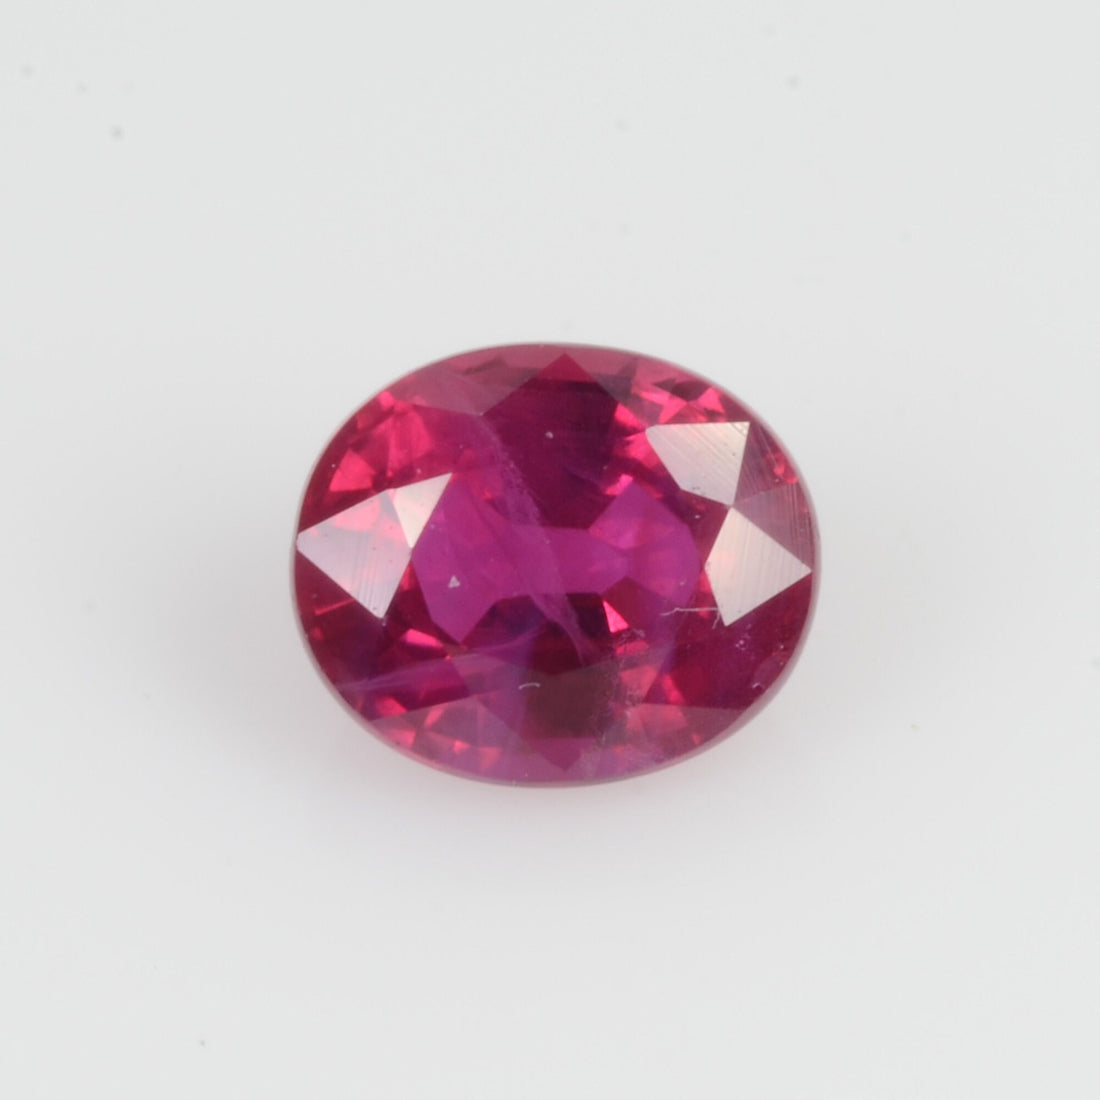 0.90 Cts Natural Ruby Loose Gemstone Oval Cut